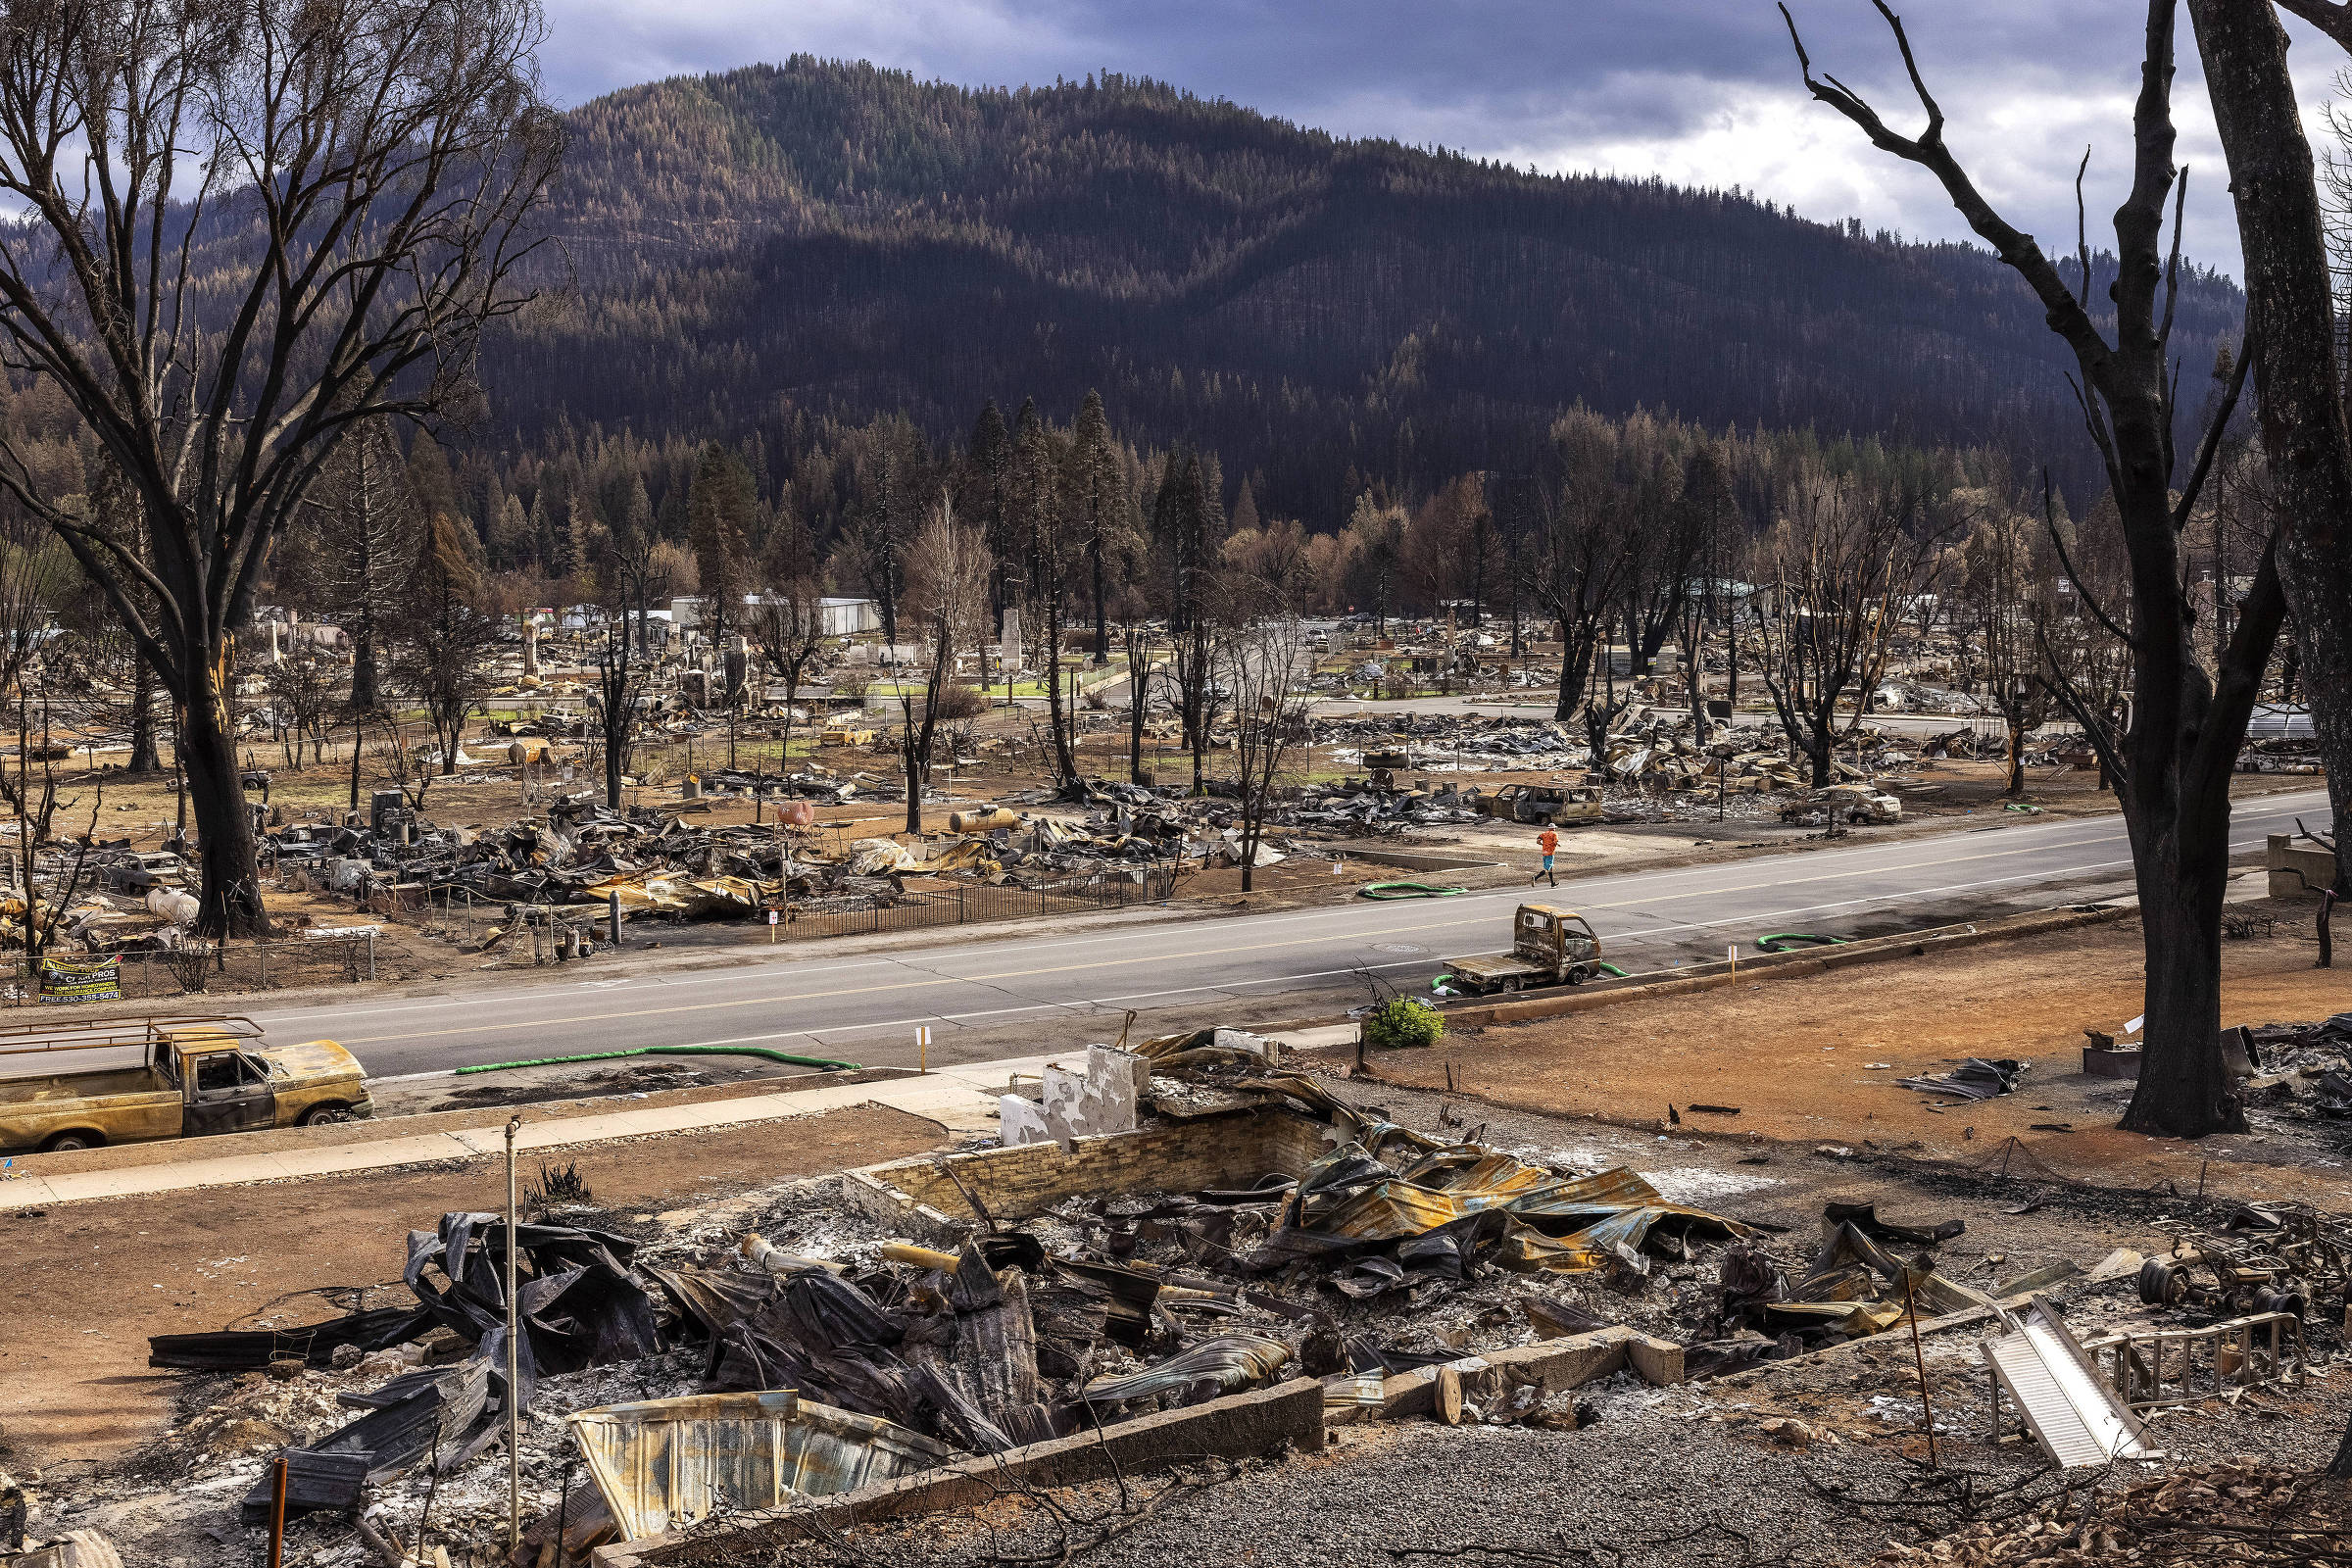 Ruins in the city of Greenville caused by Dixie, the second biggest wildfire in California history